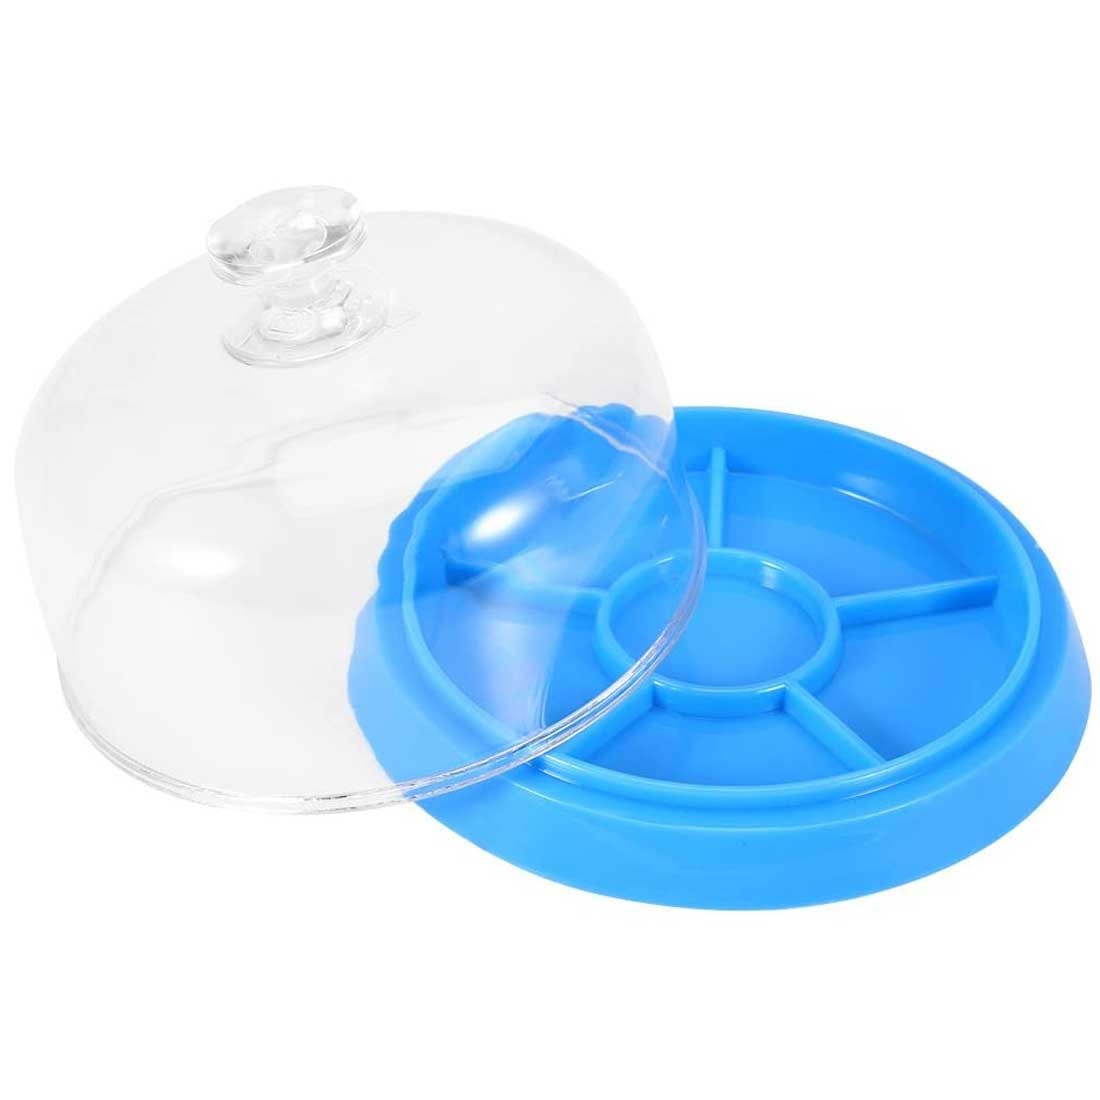 TR-105, Dust Cover with 1 Tray 4" Diameter